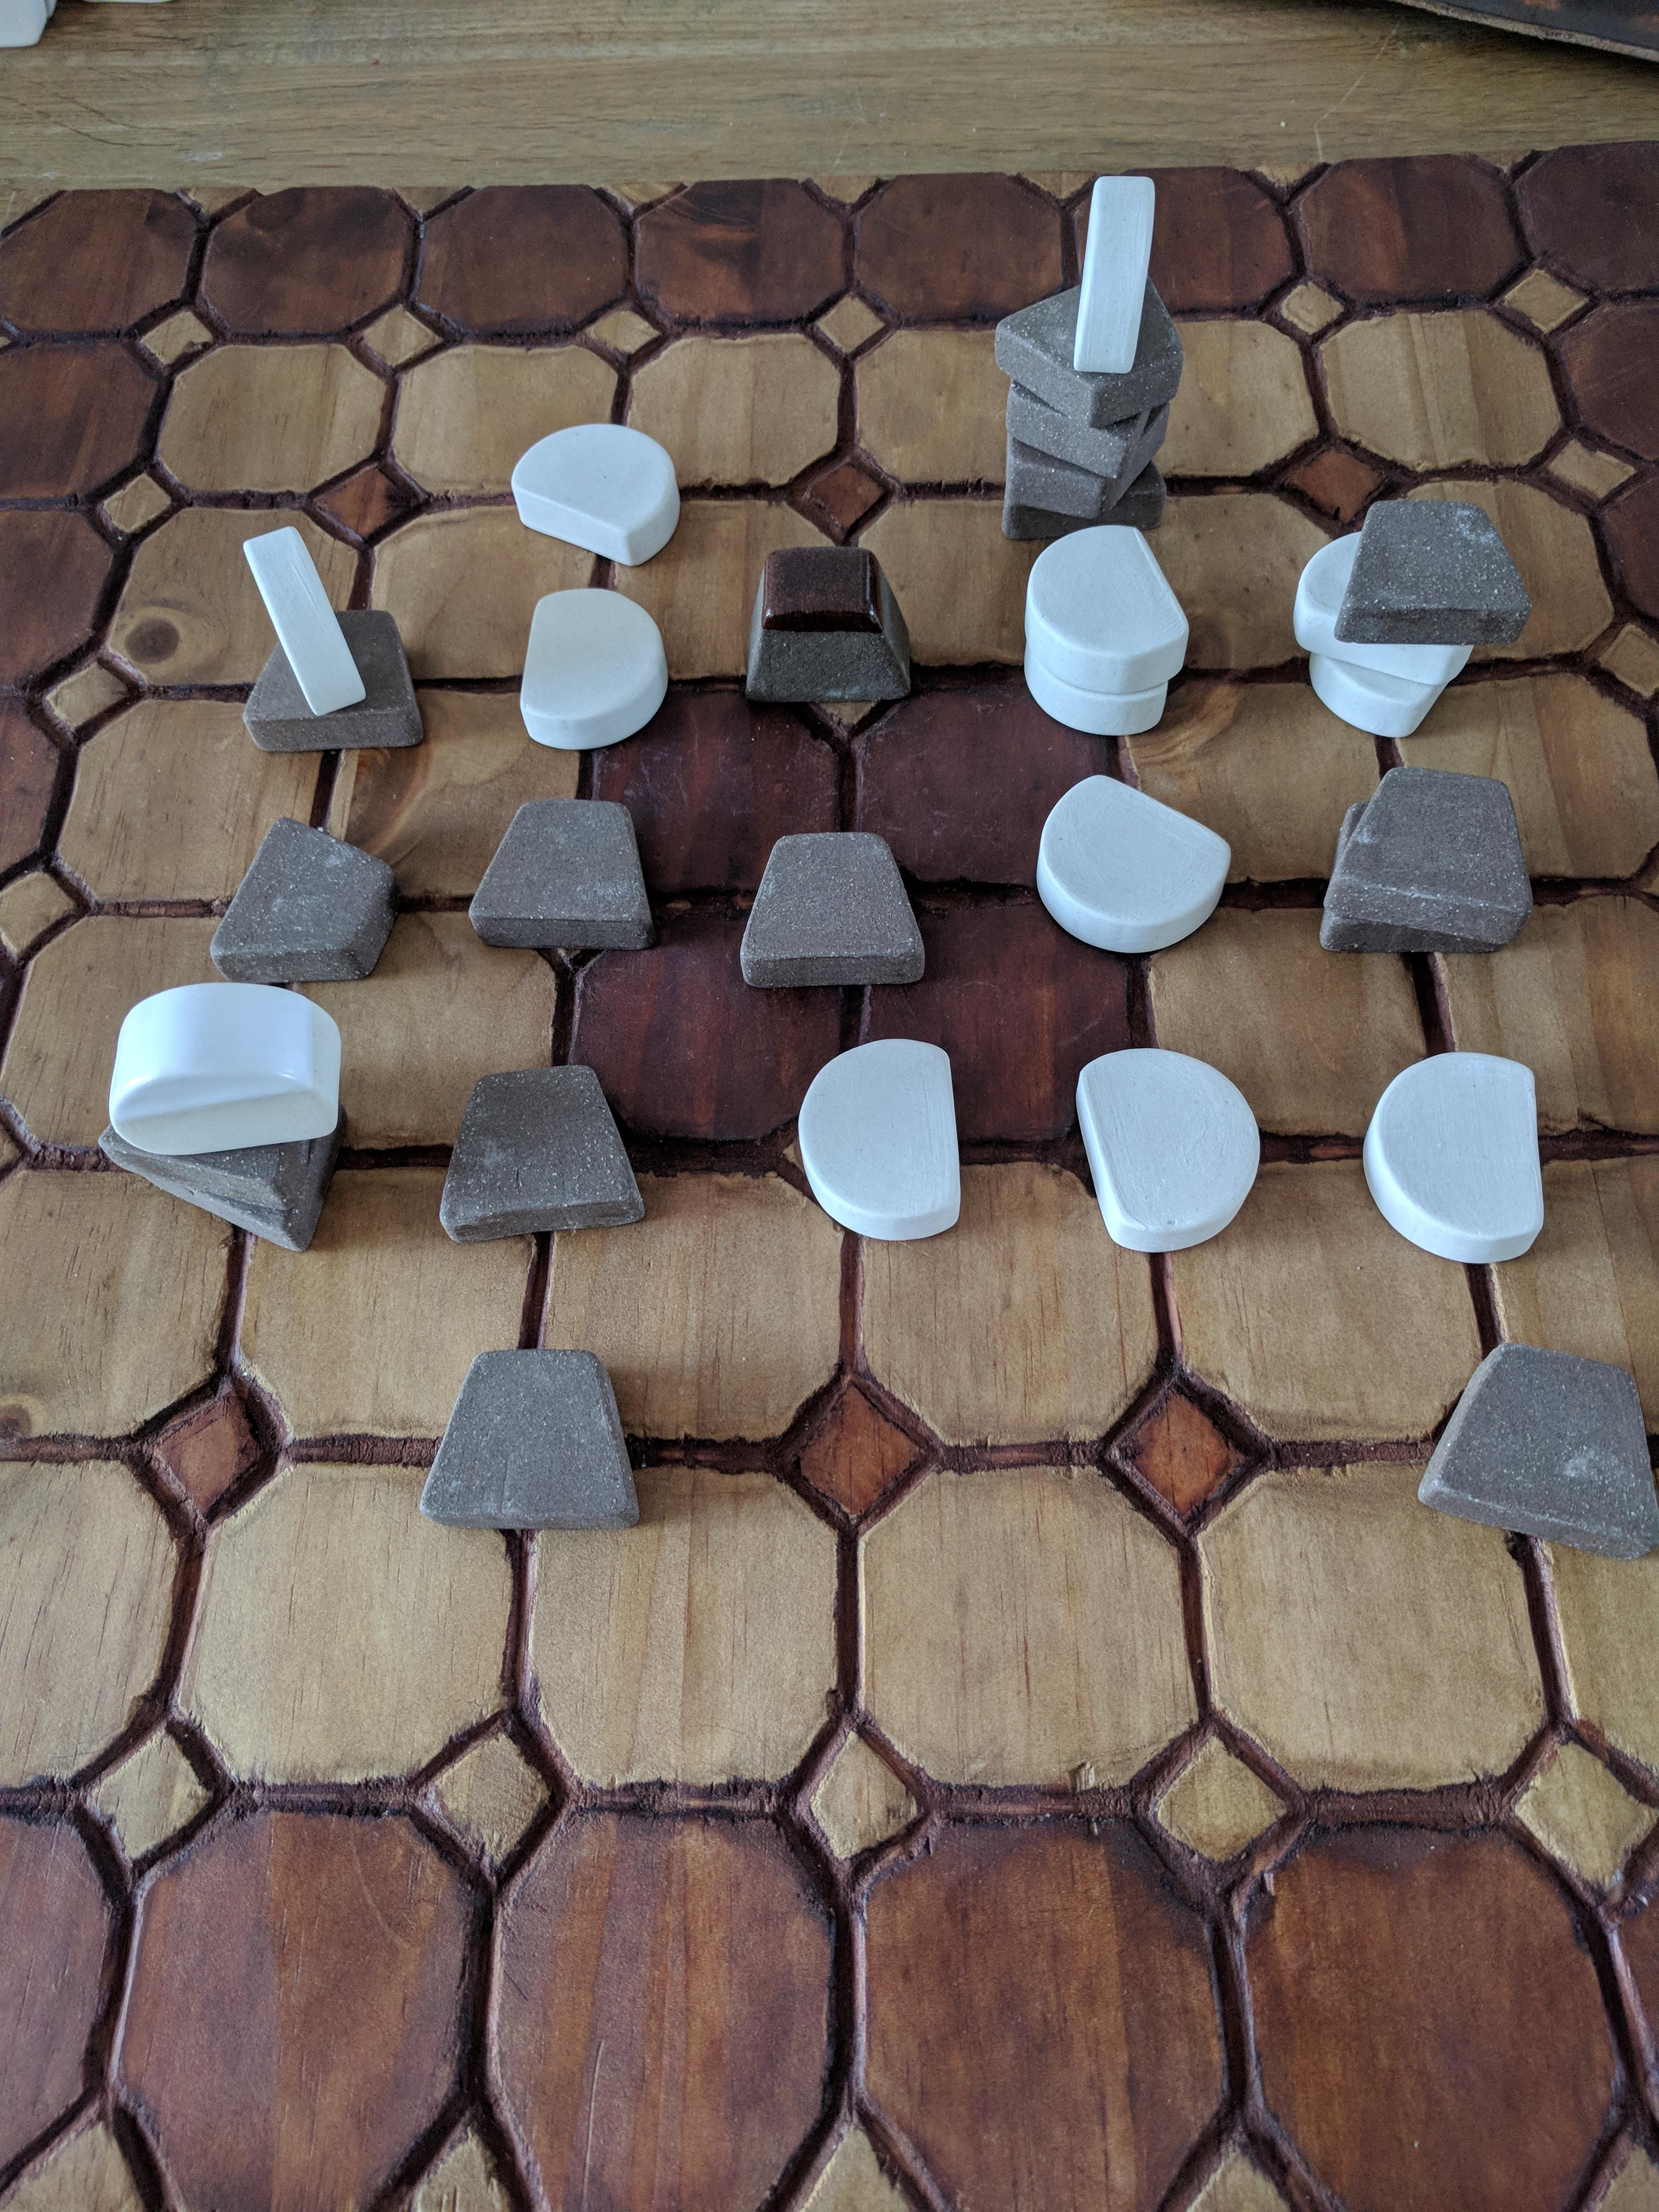 My stone pieces arrived today! : Tak